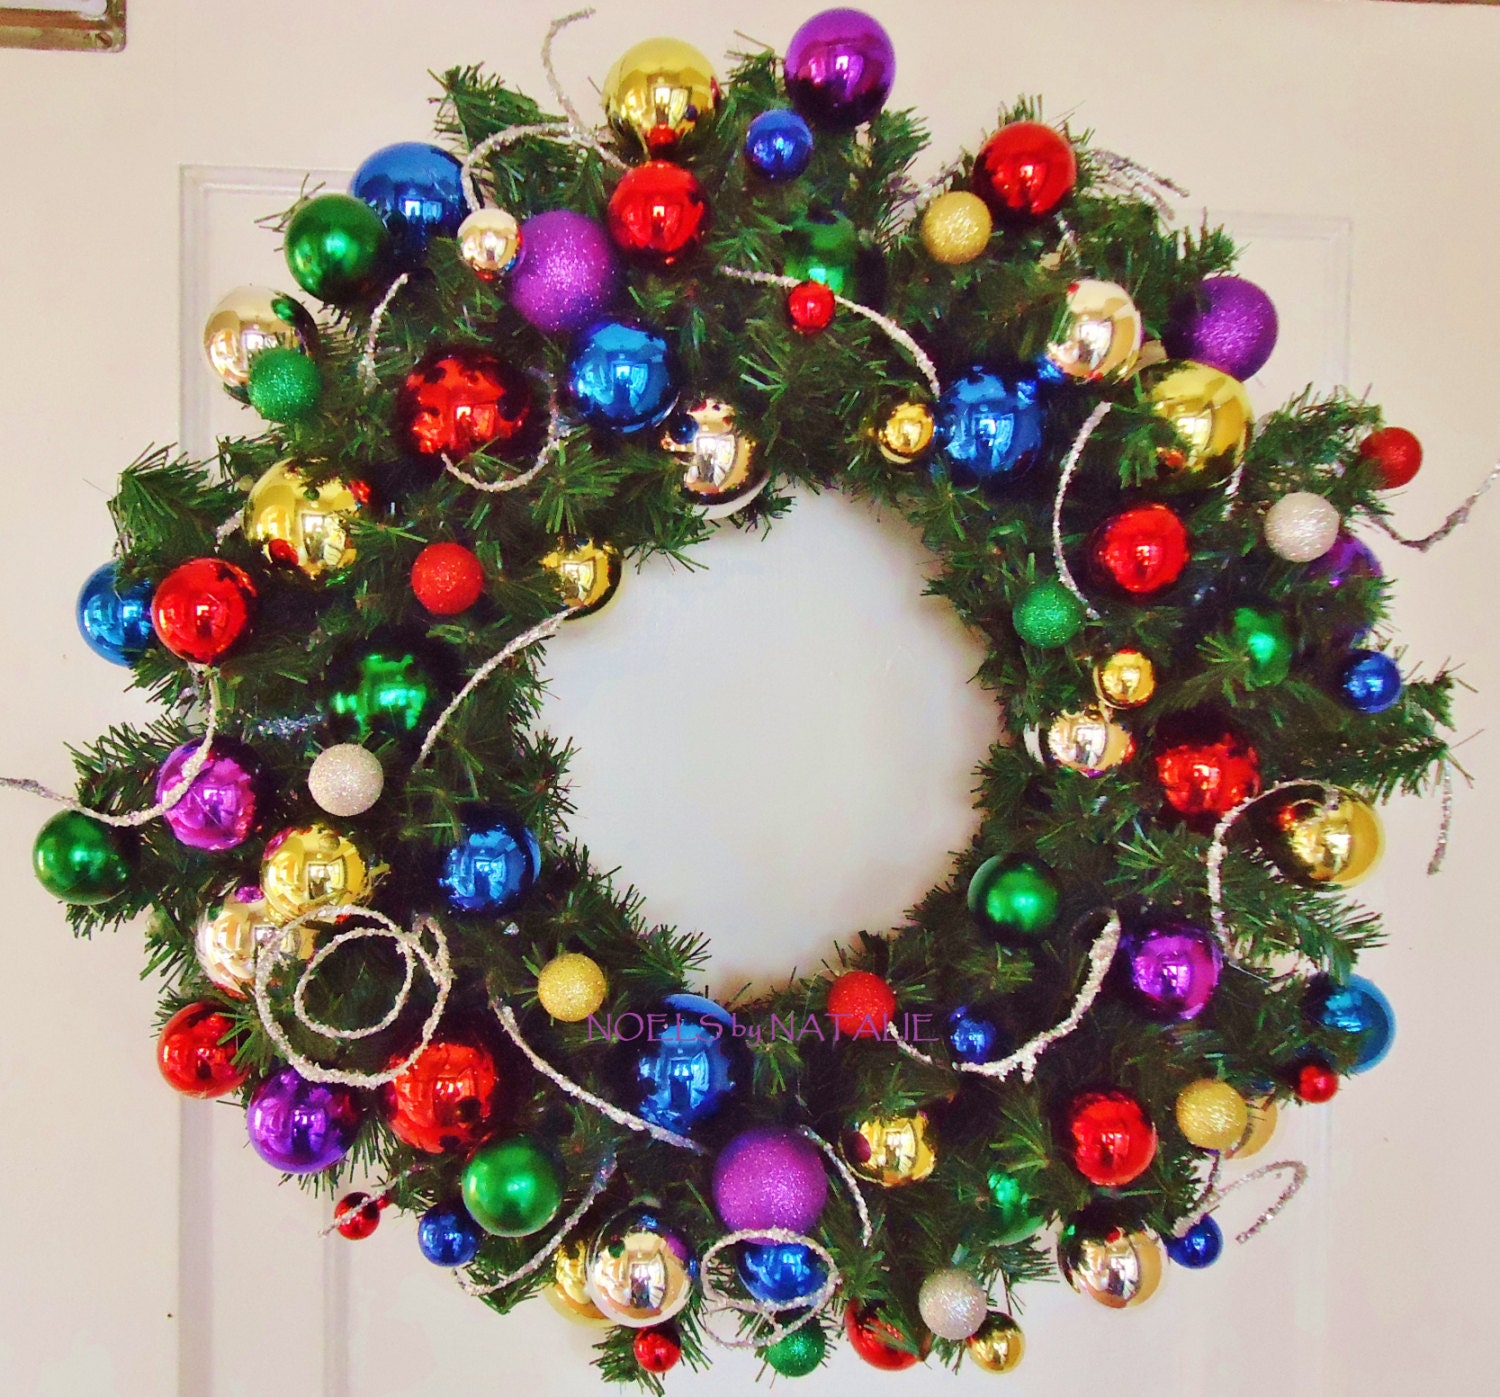 24" Multi-colored with purple Christmas Wreath